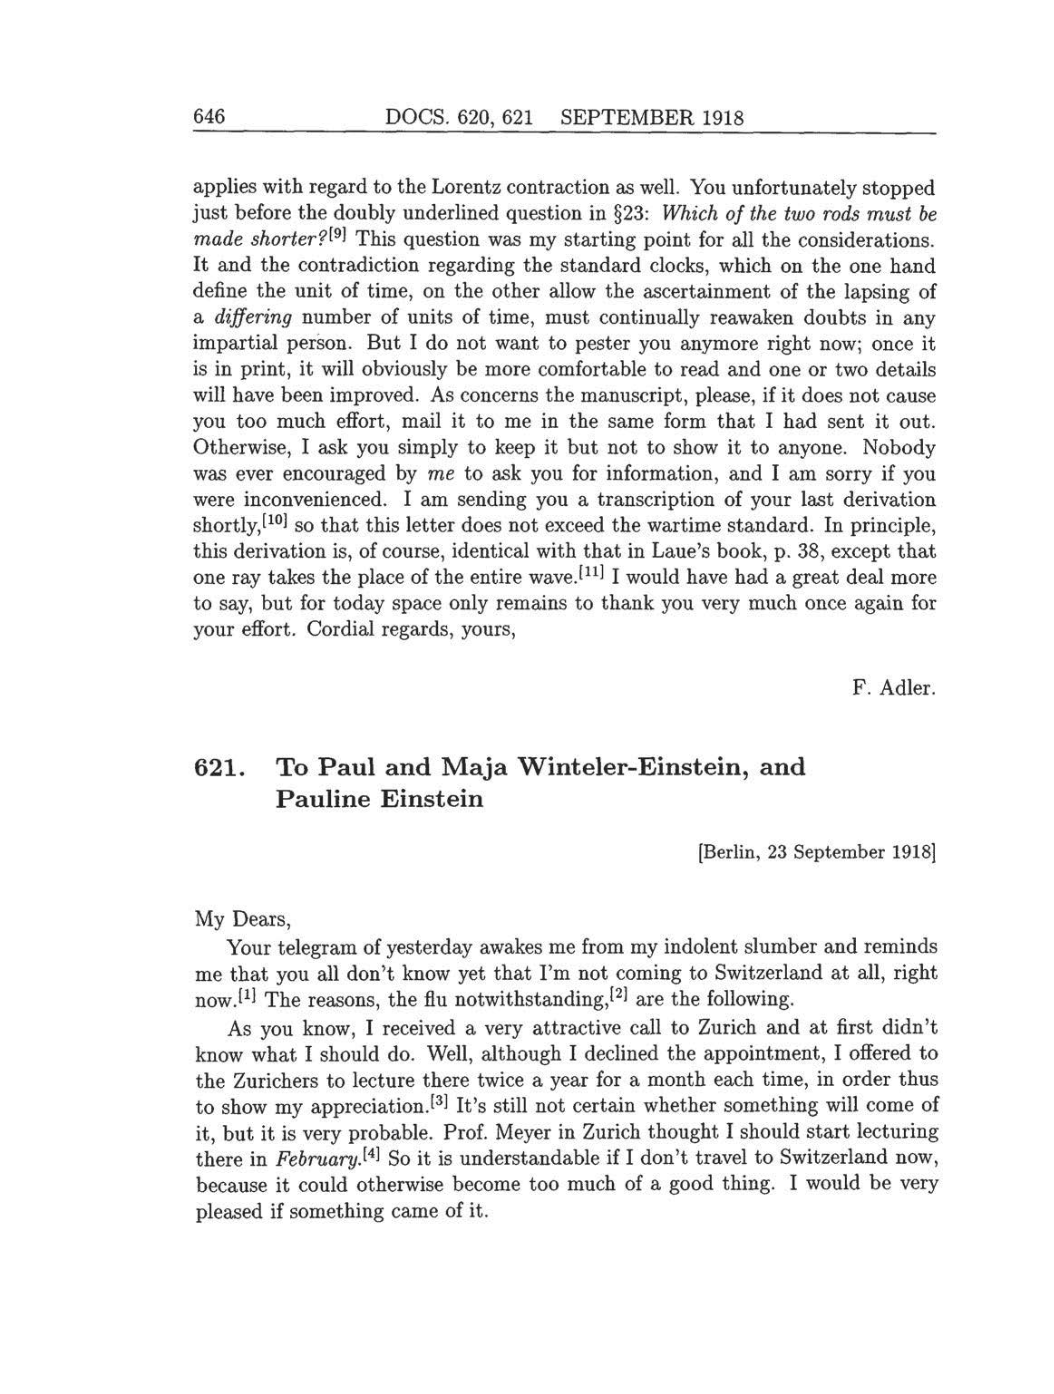 Volume 8: The Berlin Years: Correspondence, 1914-1918 (English translation supplement) page 646